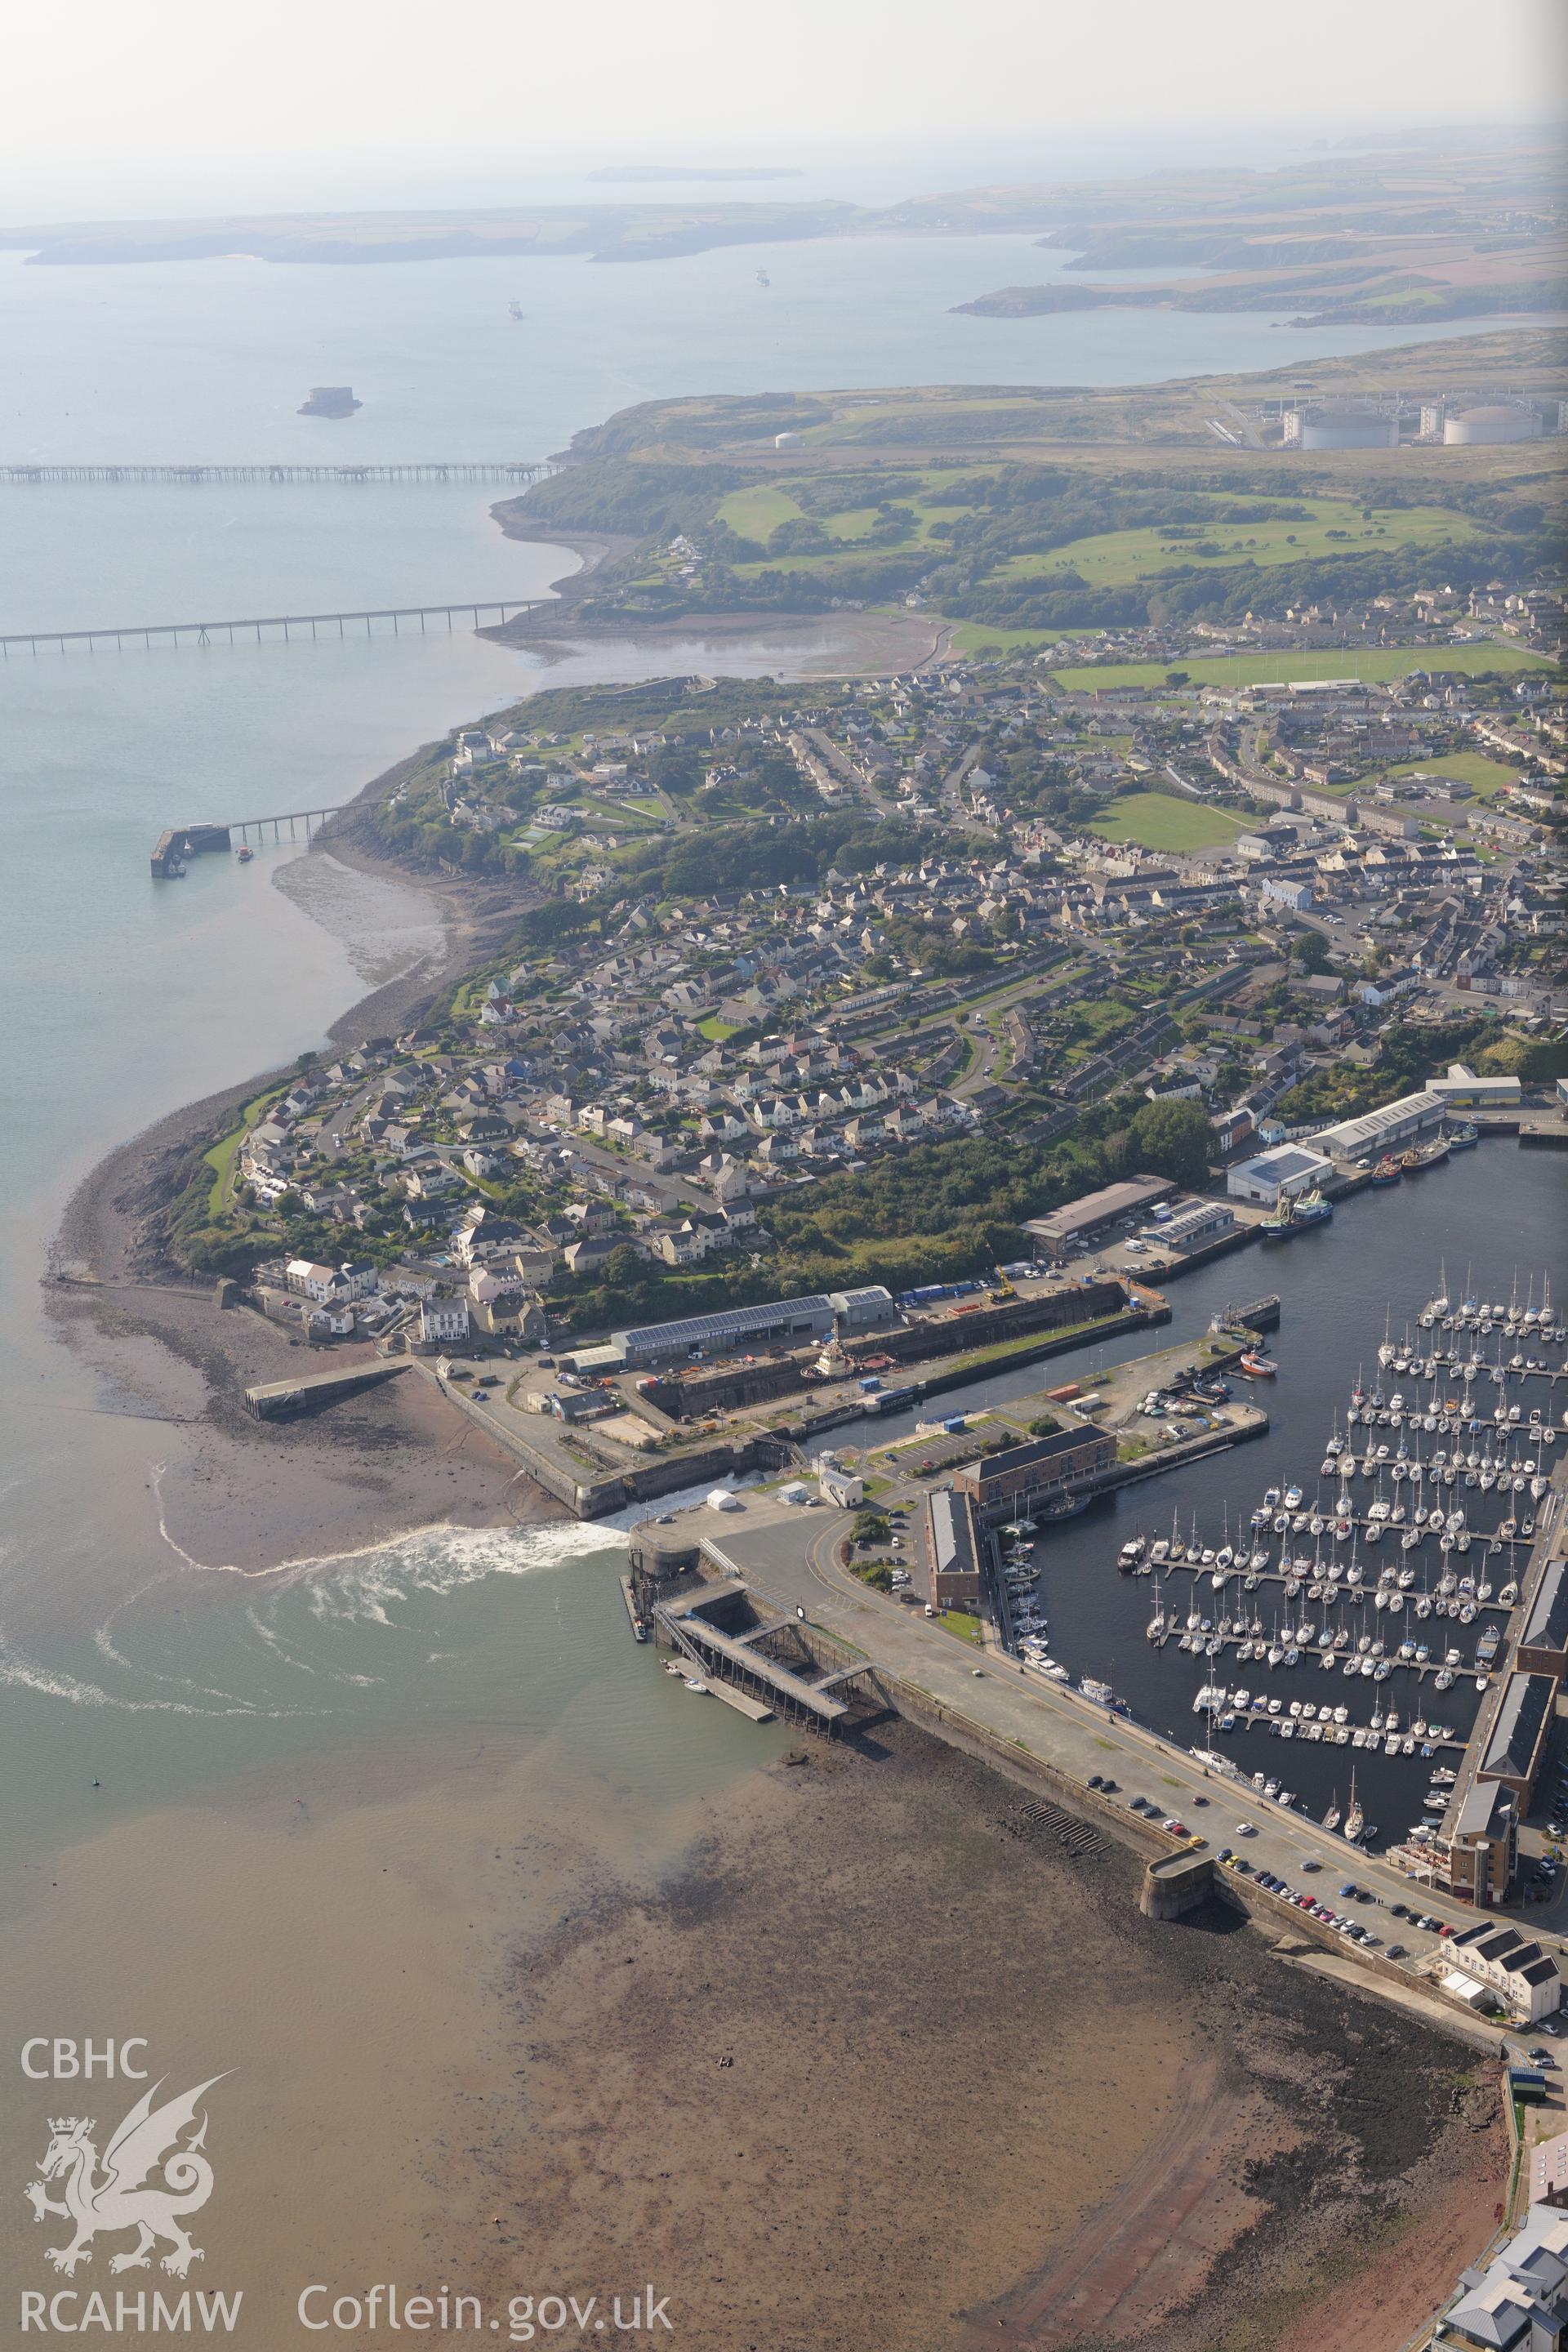 View of Milford Haven town and docks taken from the south east. Oblique aerial photograph taken during the Royal Commission's programme of archaeological aerial reconnaissance by Toby Driver on 30th September 2015.